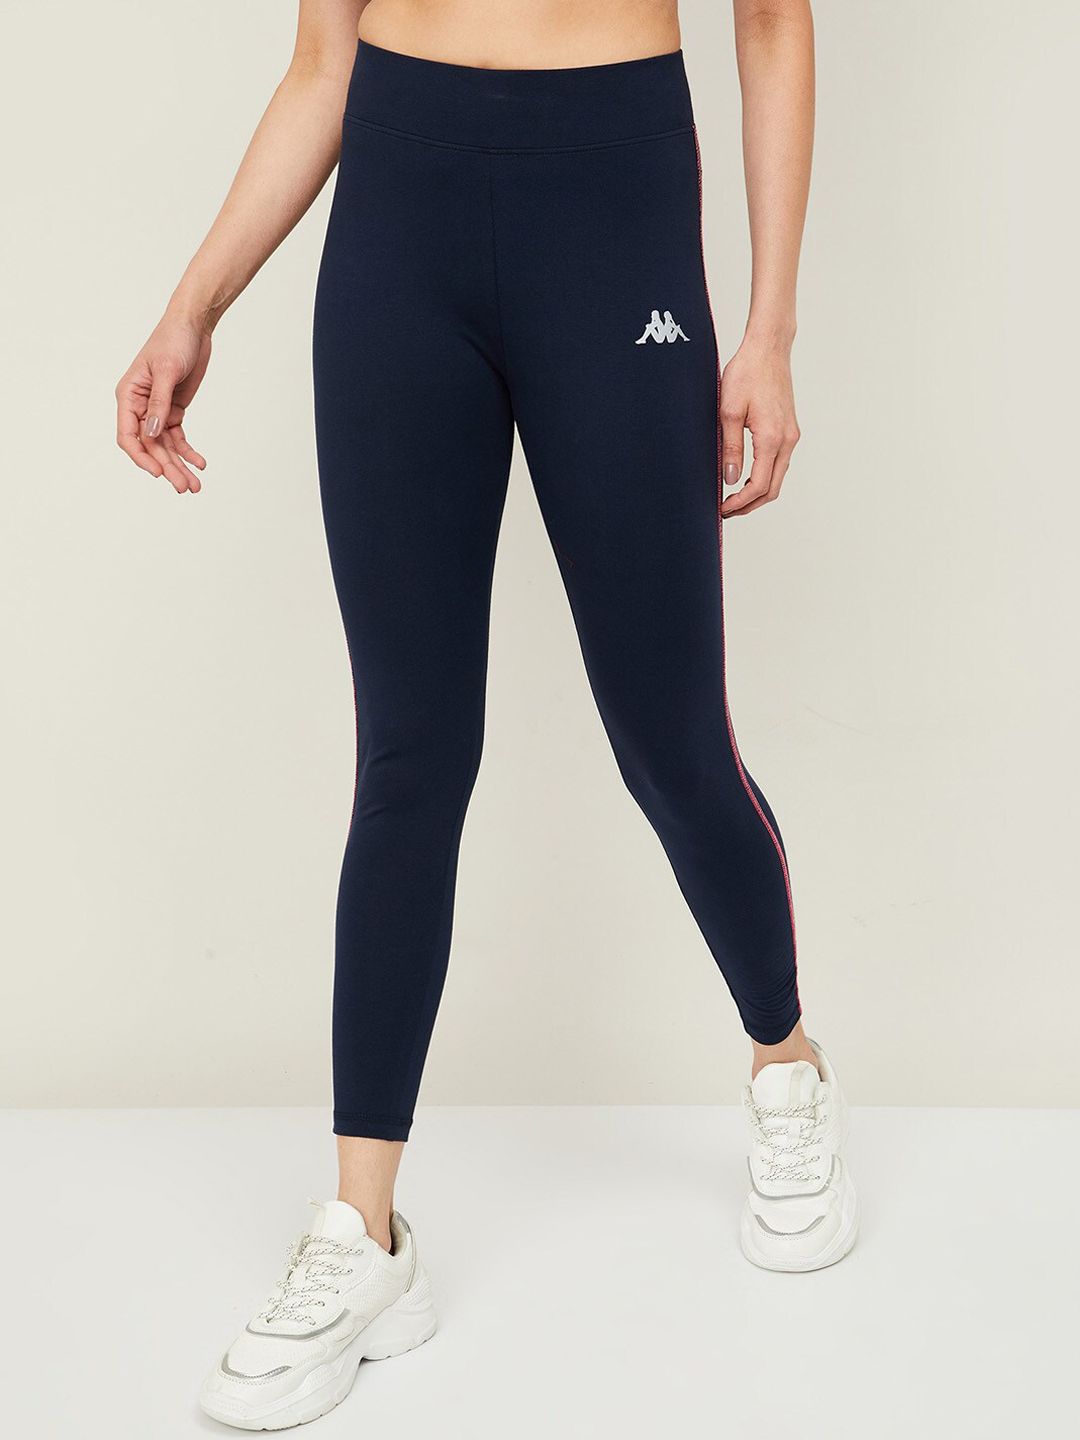 Kappa Women Navy Blue Solid Training Or Gym Tights Price in India